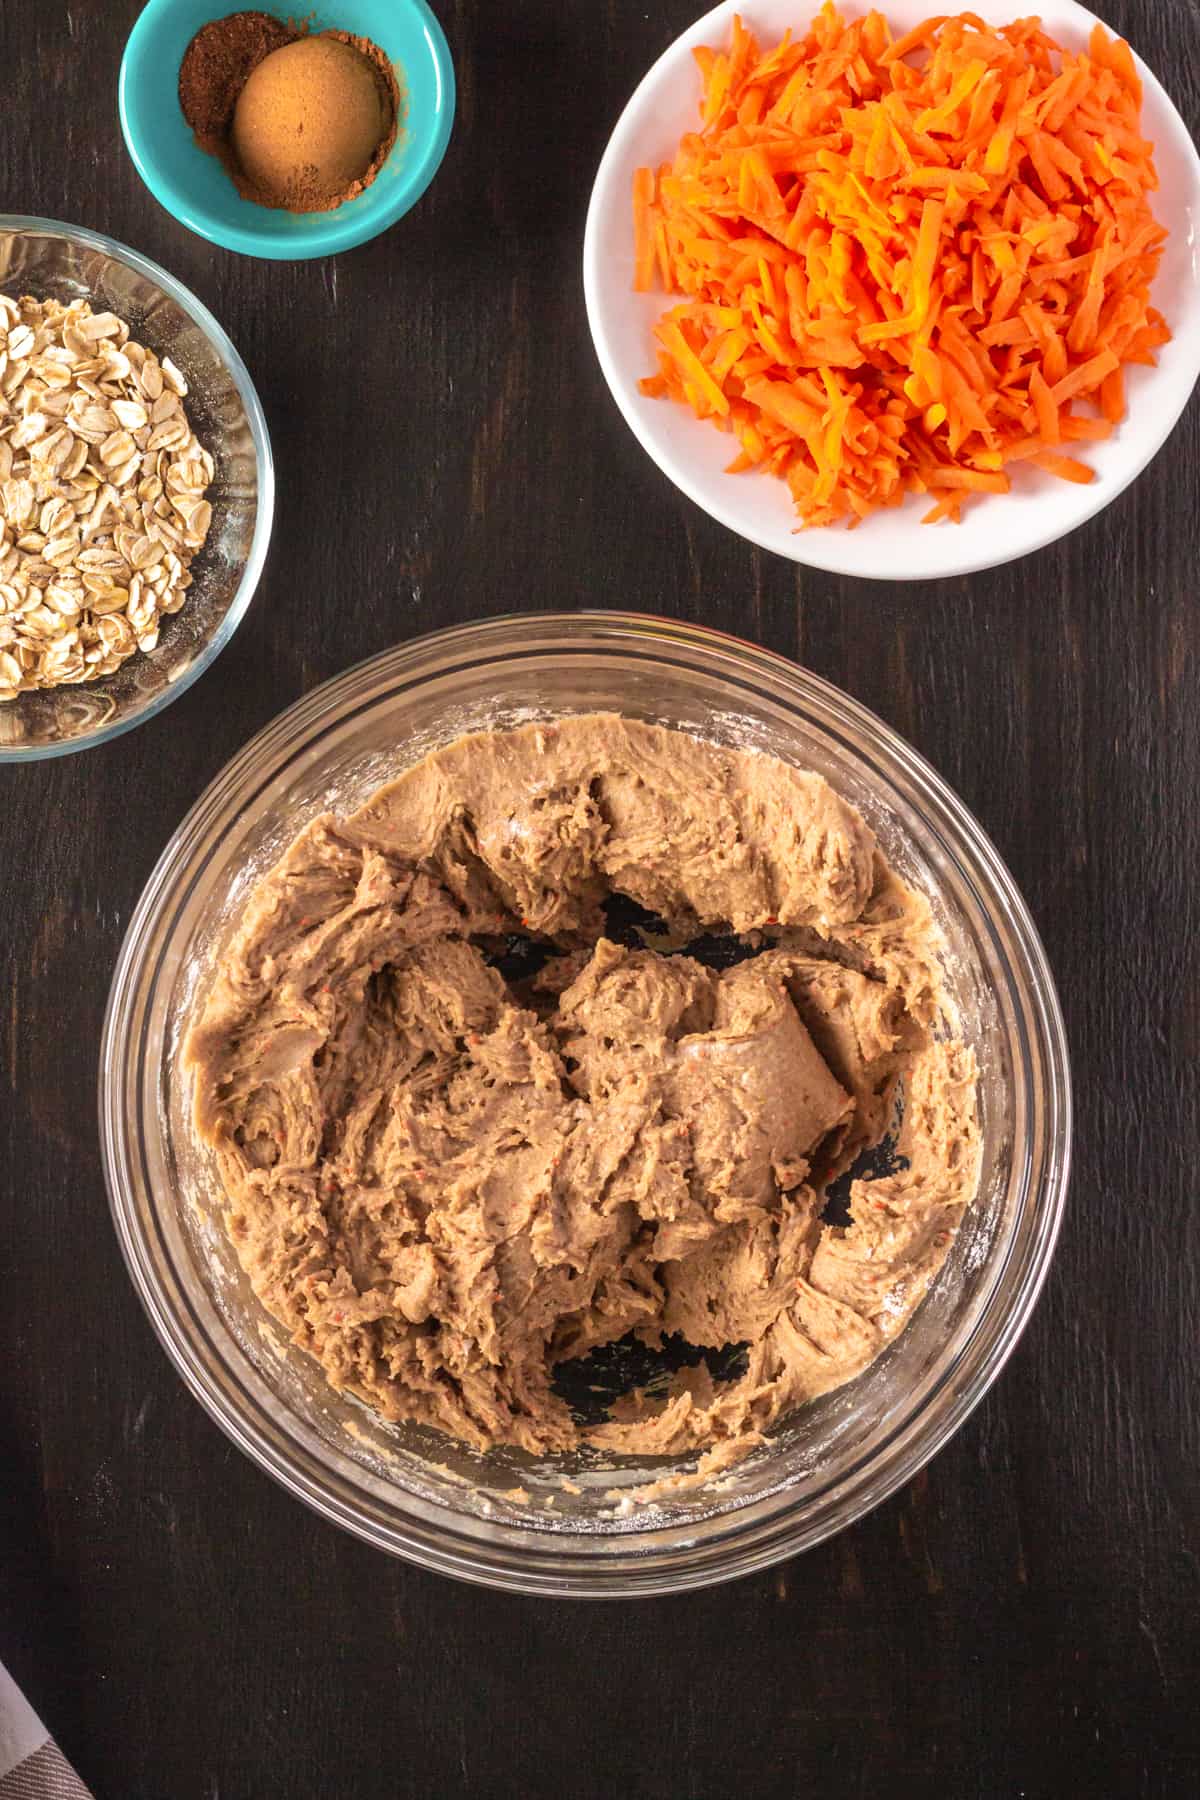 Cookie dough in mixing bowl with shredded carrots, oats, and spices nearby.